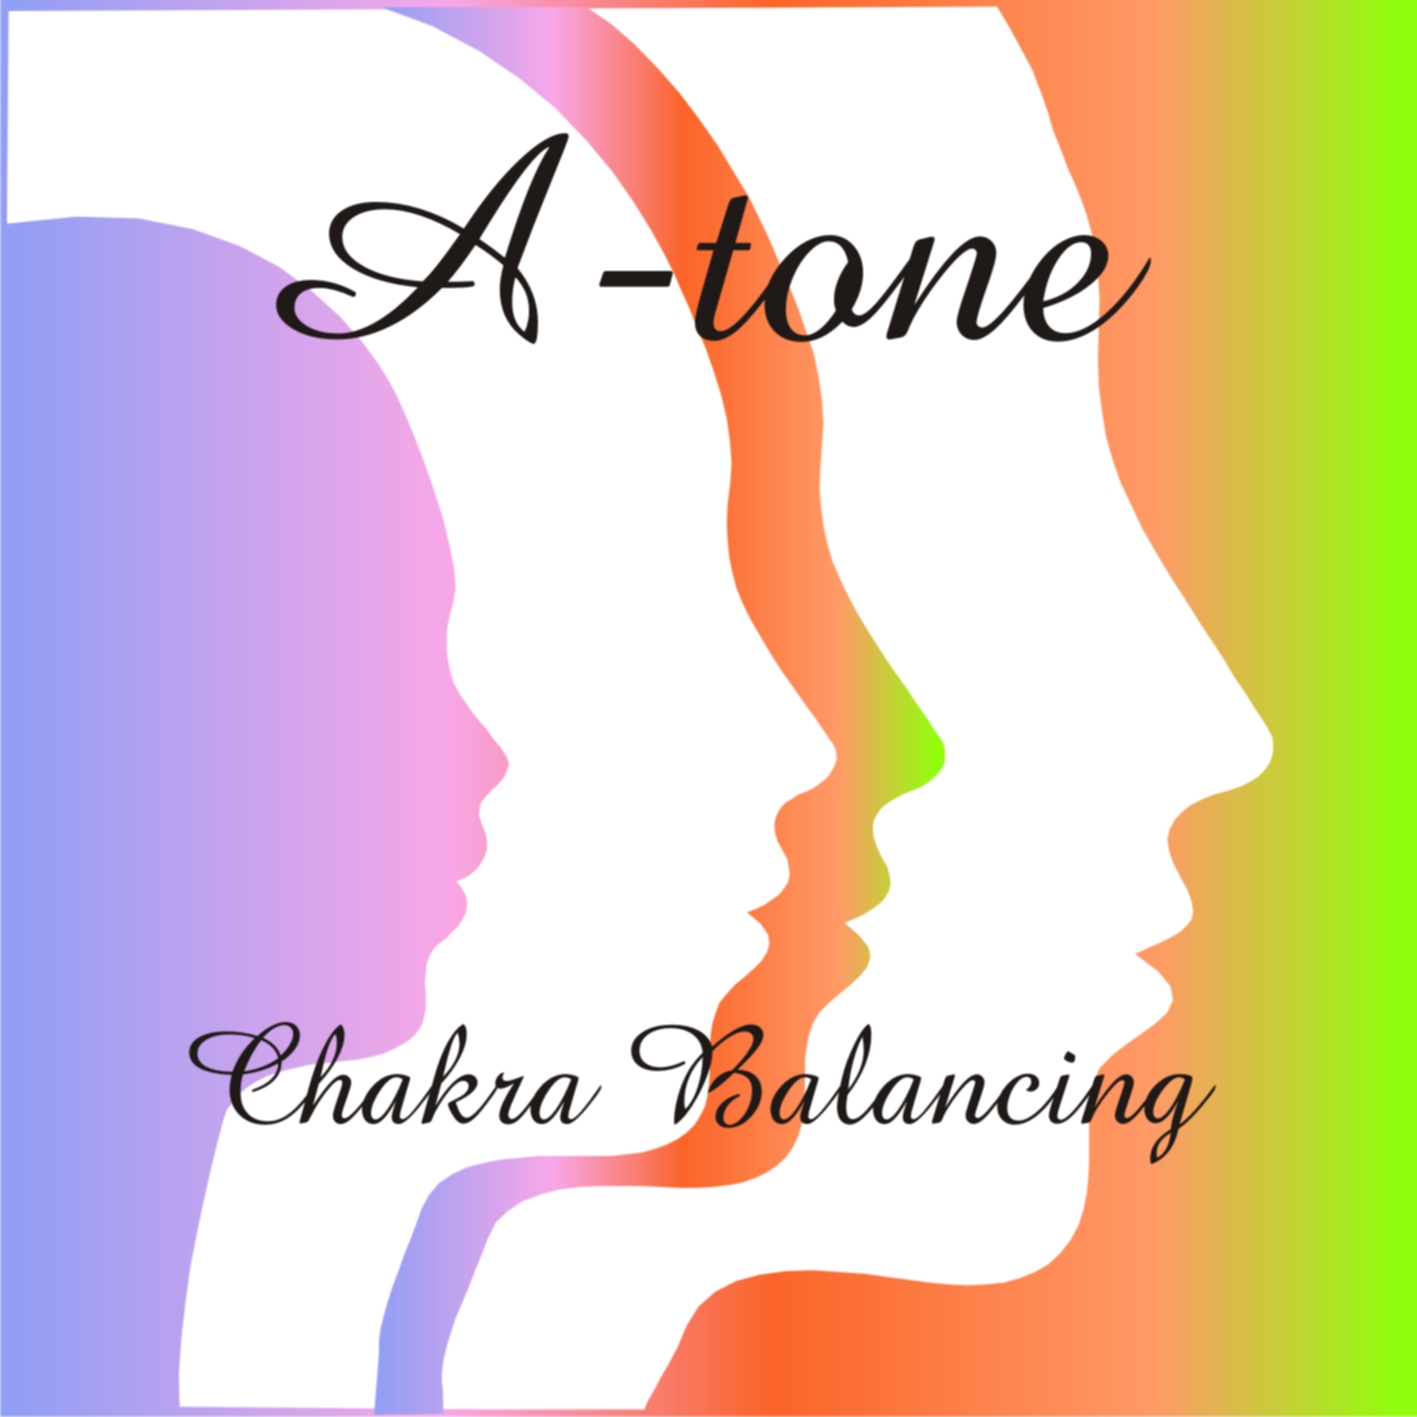 A-Tone CD - Available via Downloadable Link